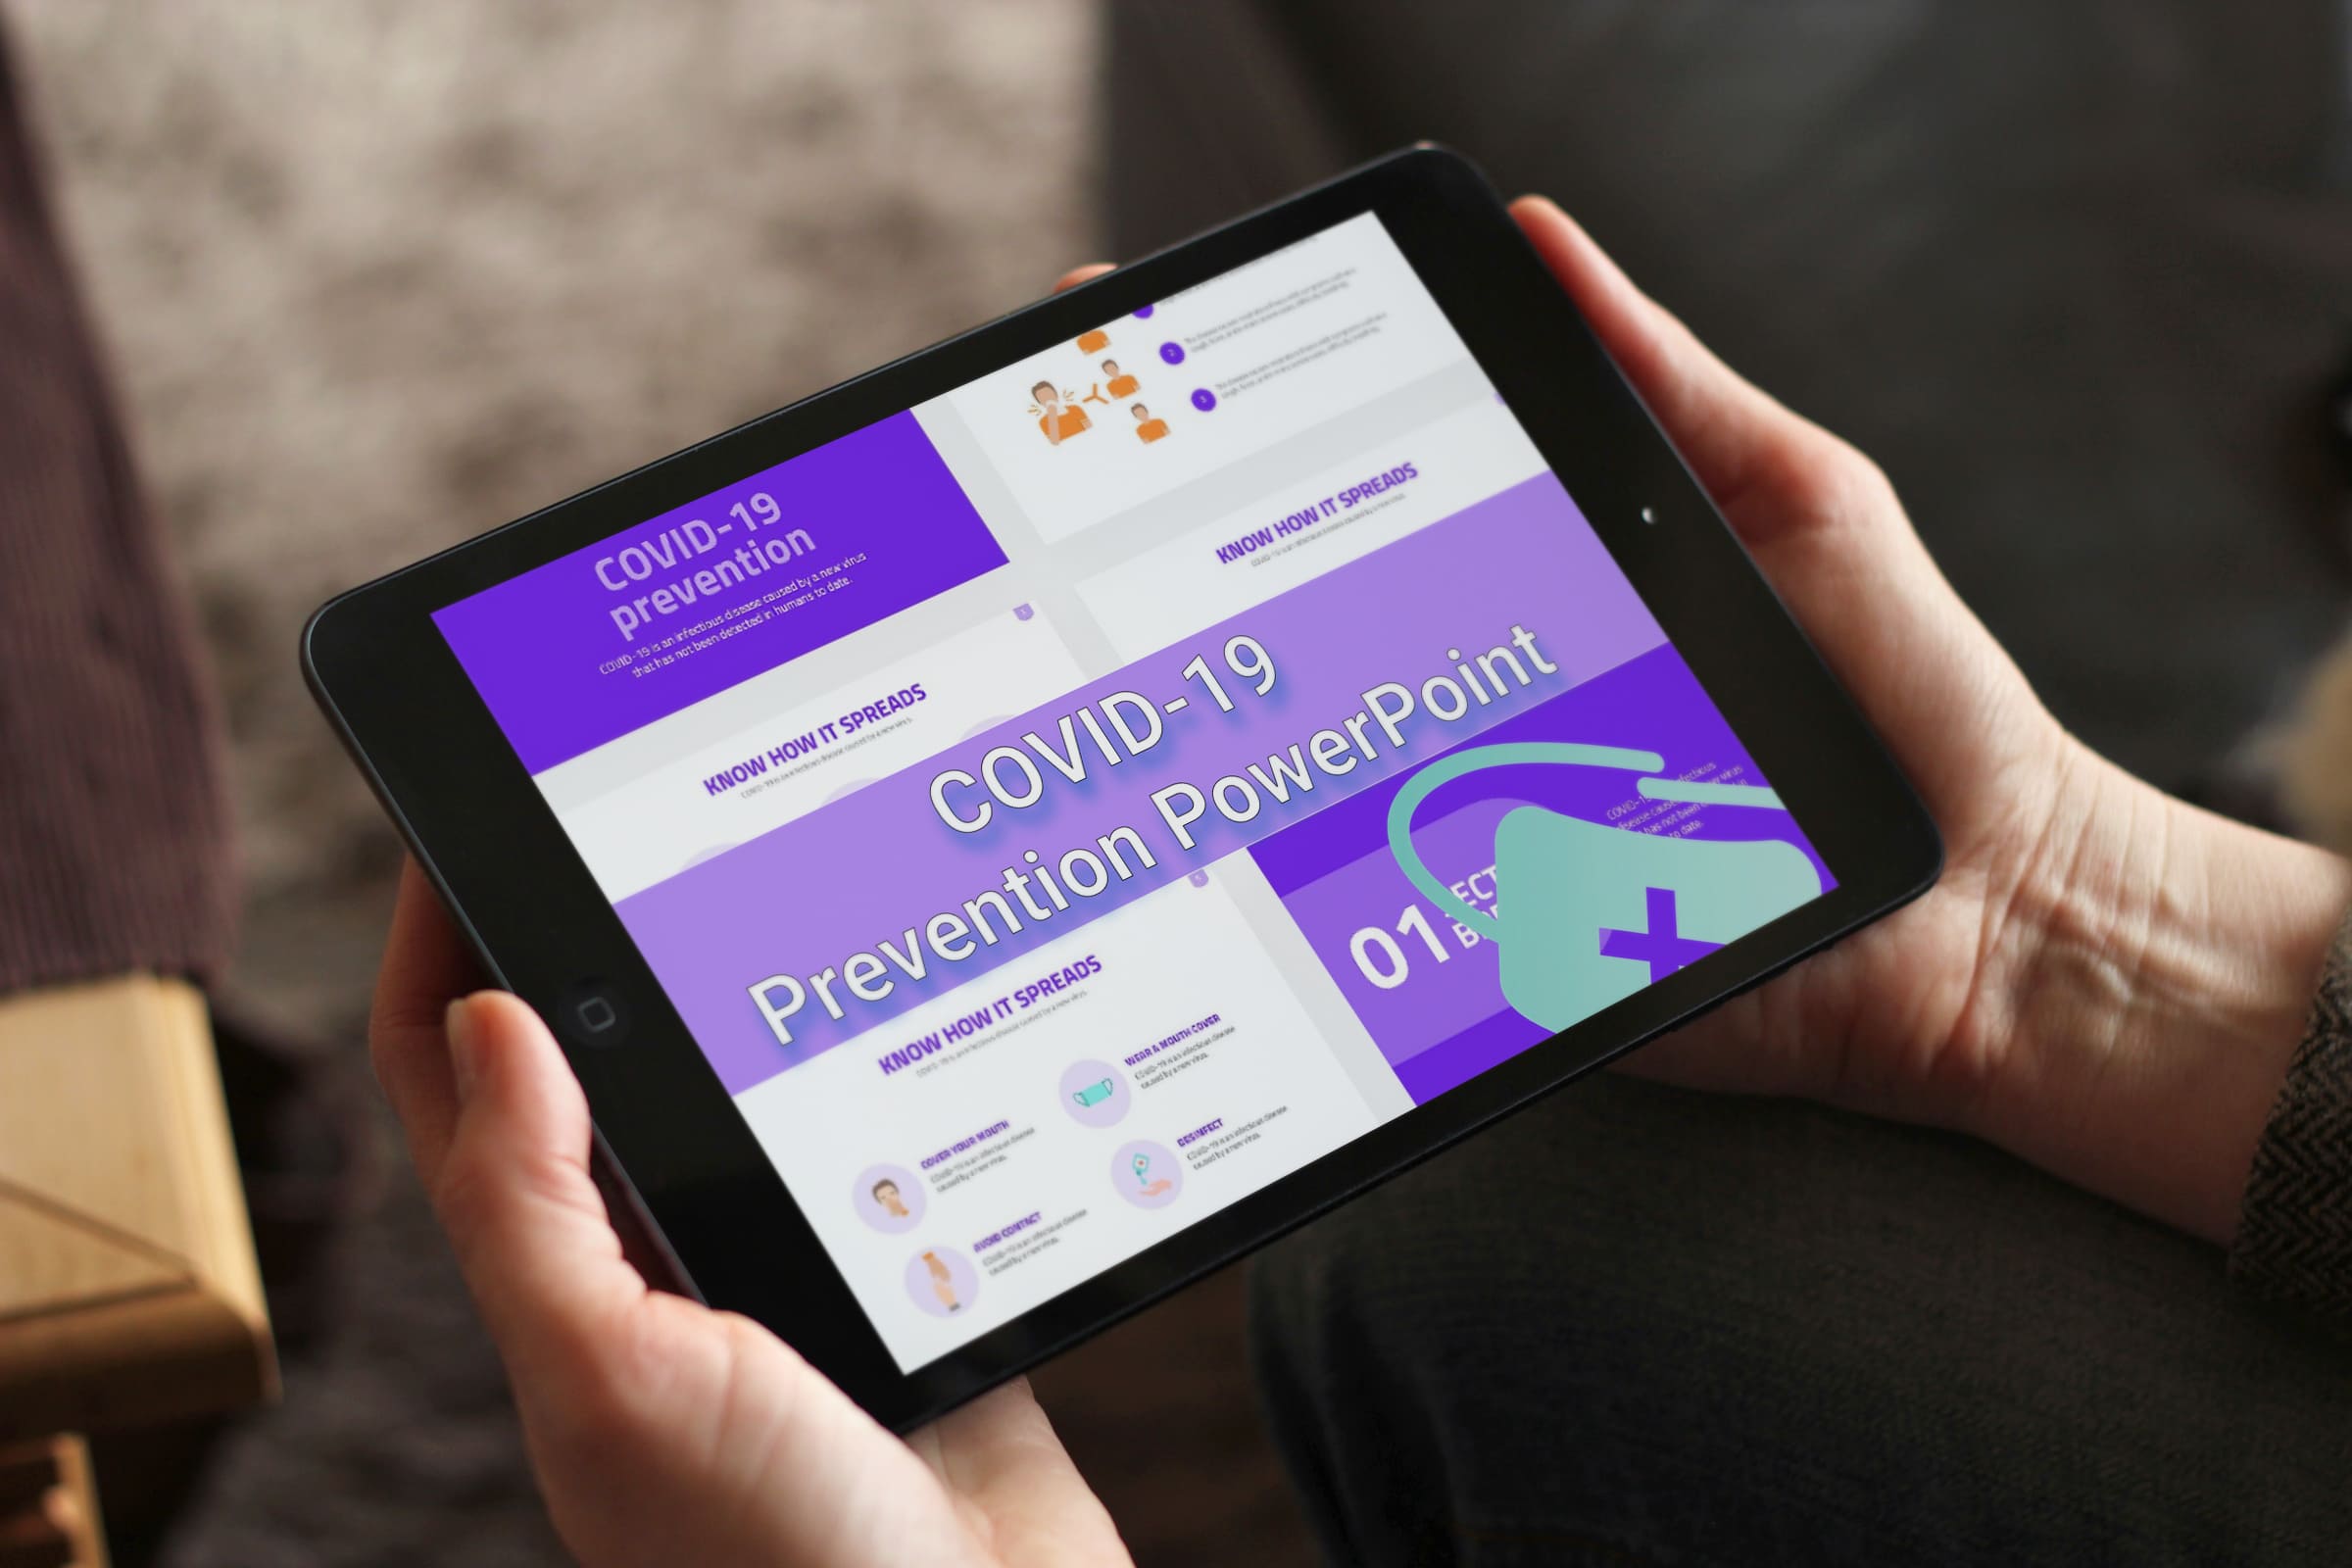 Tablet option of the COVID 19 Prevention.